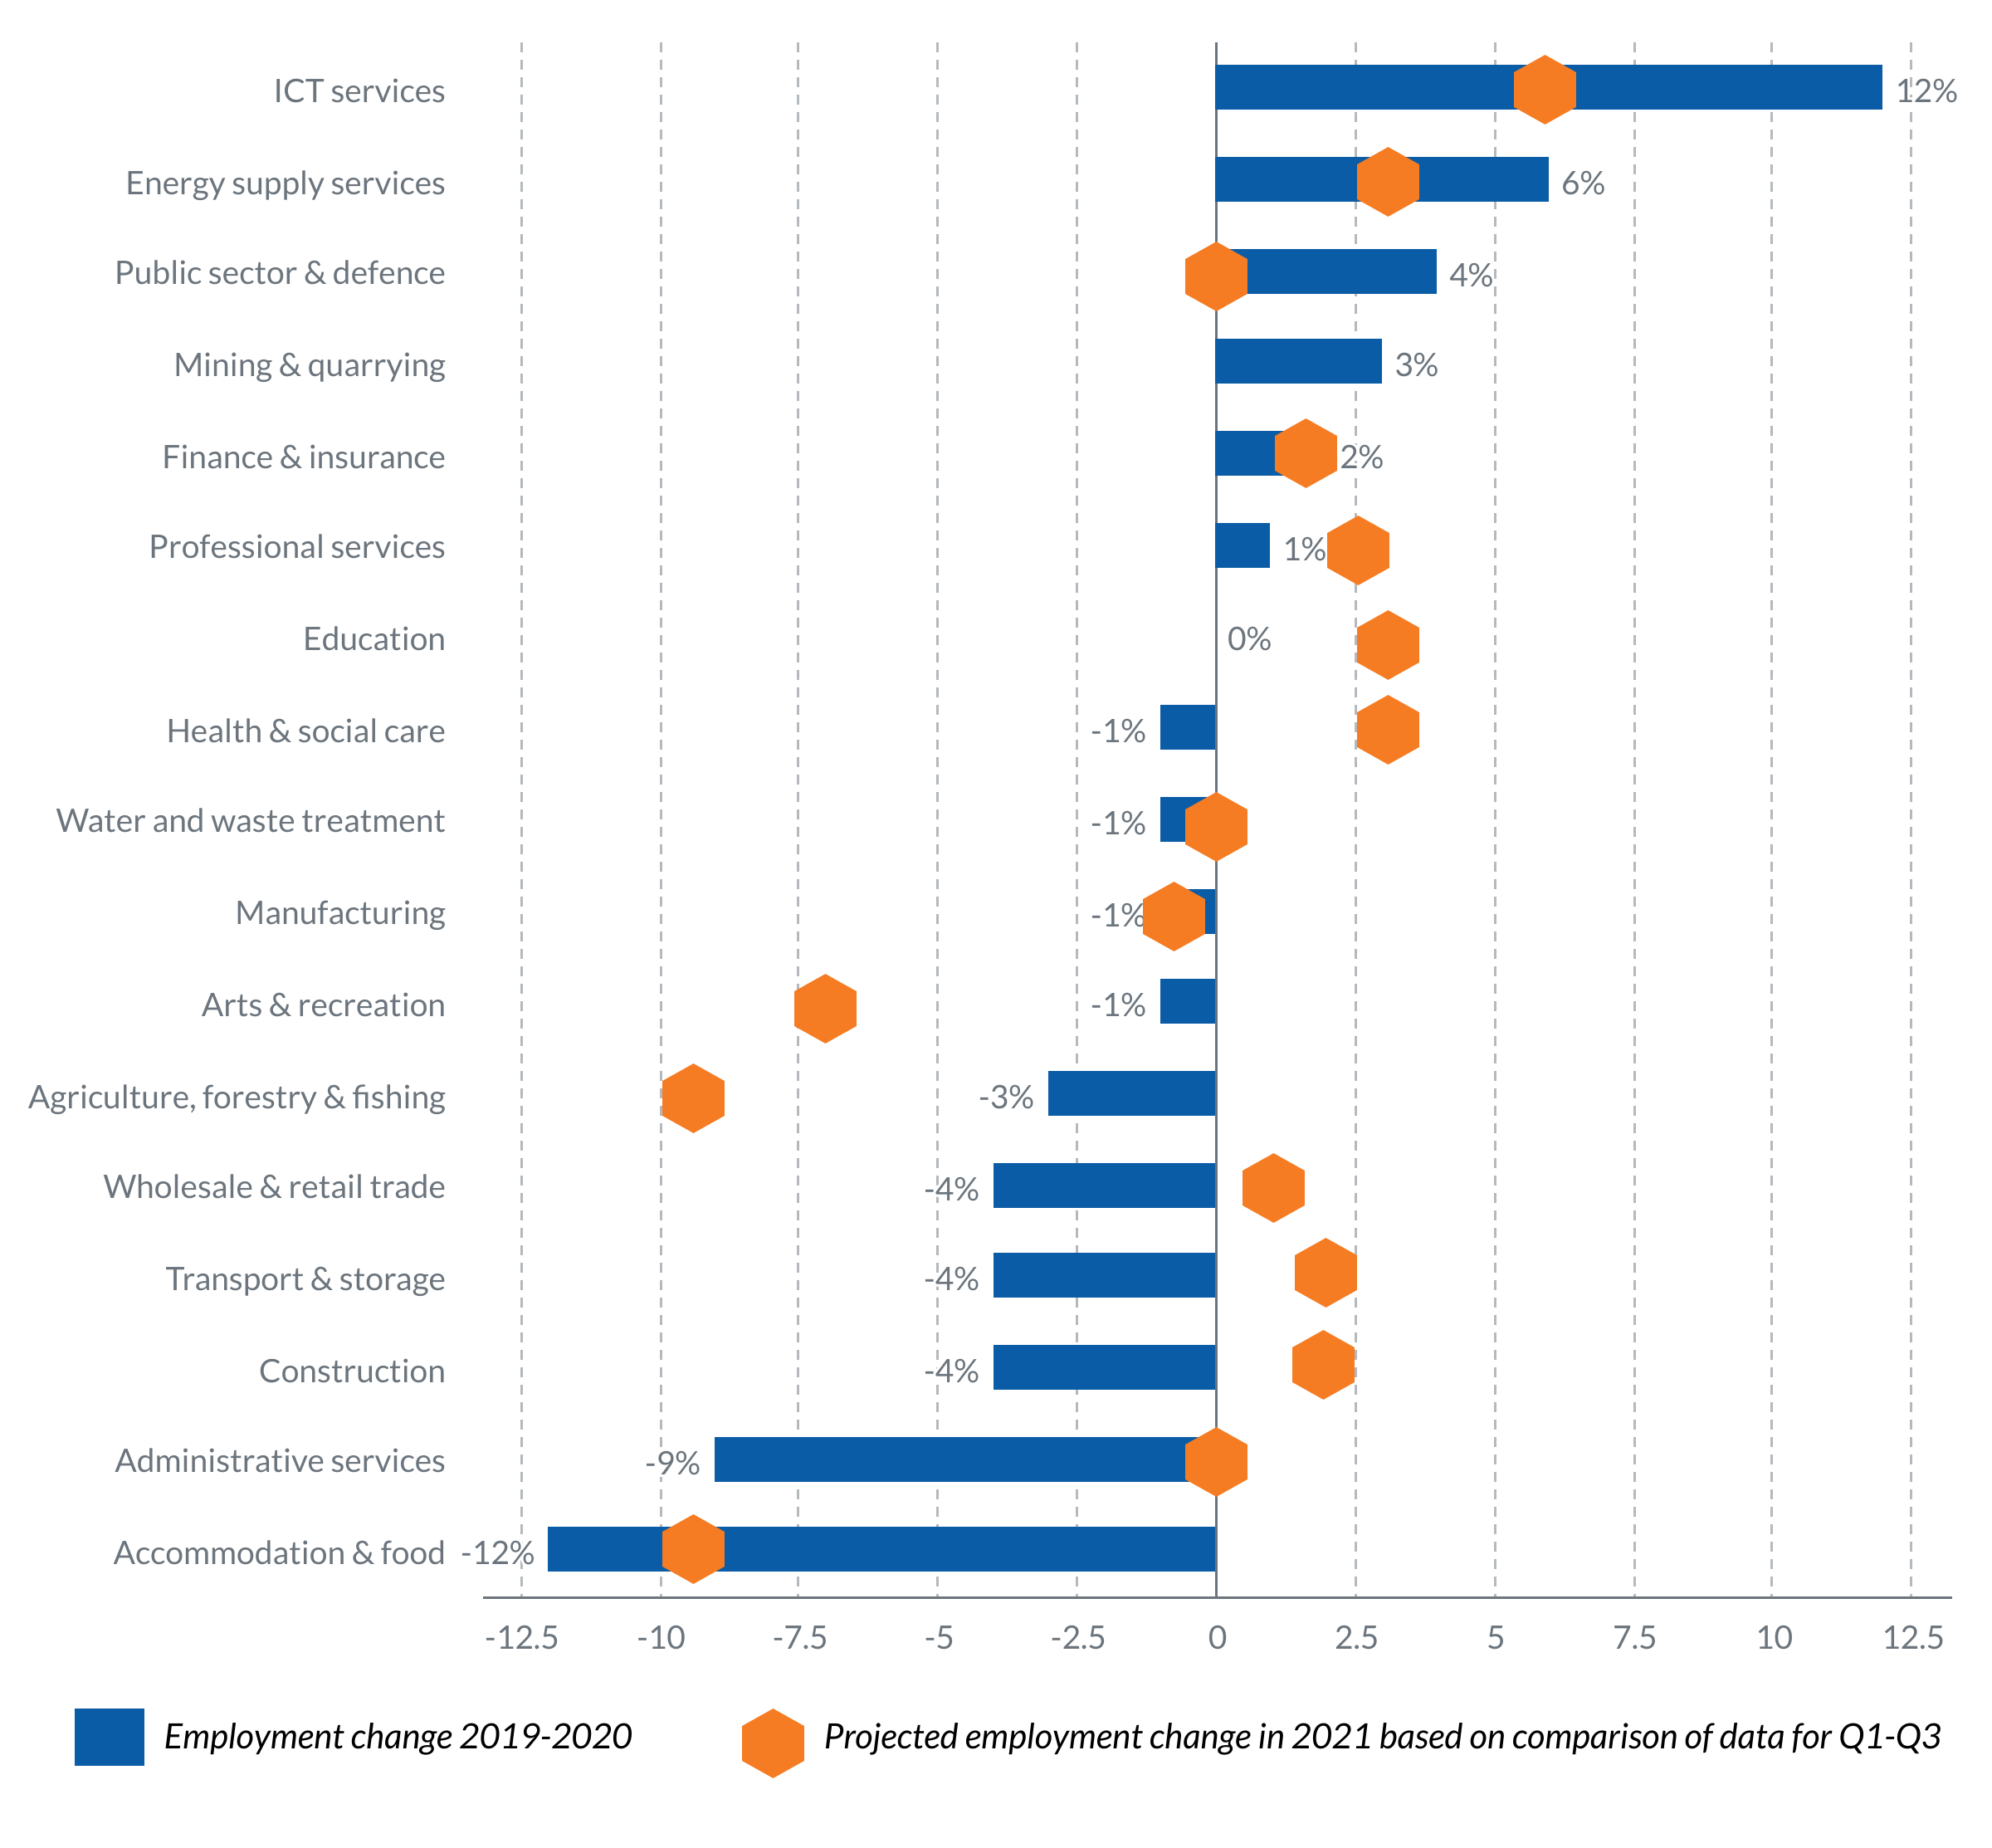 ICT, energy supply and public administration were the fastest growing sectors in 2020.